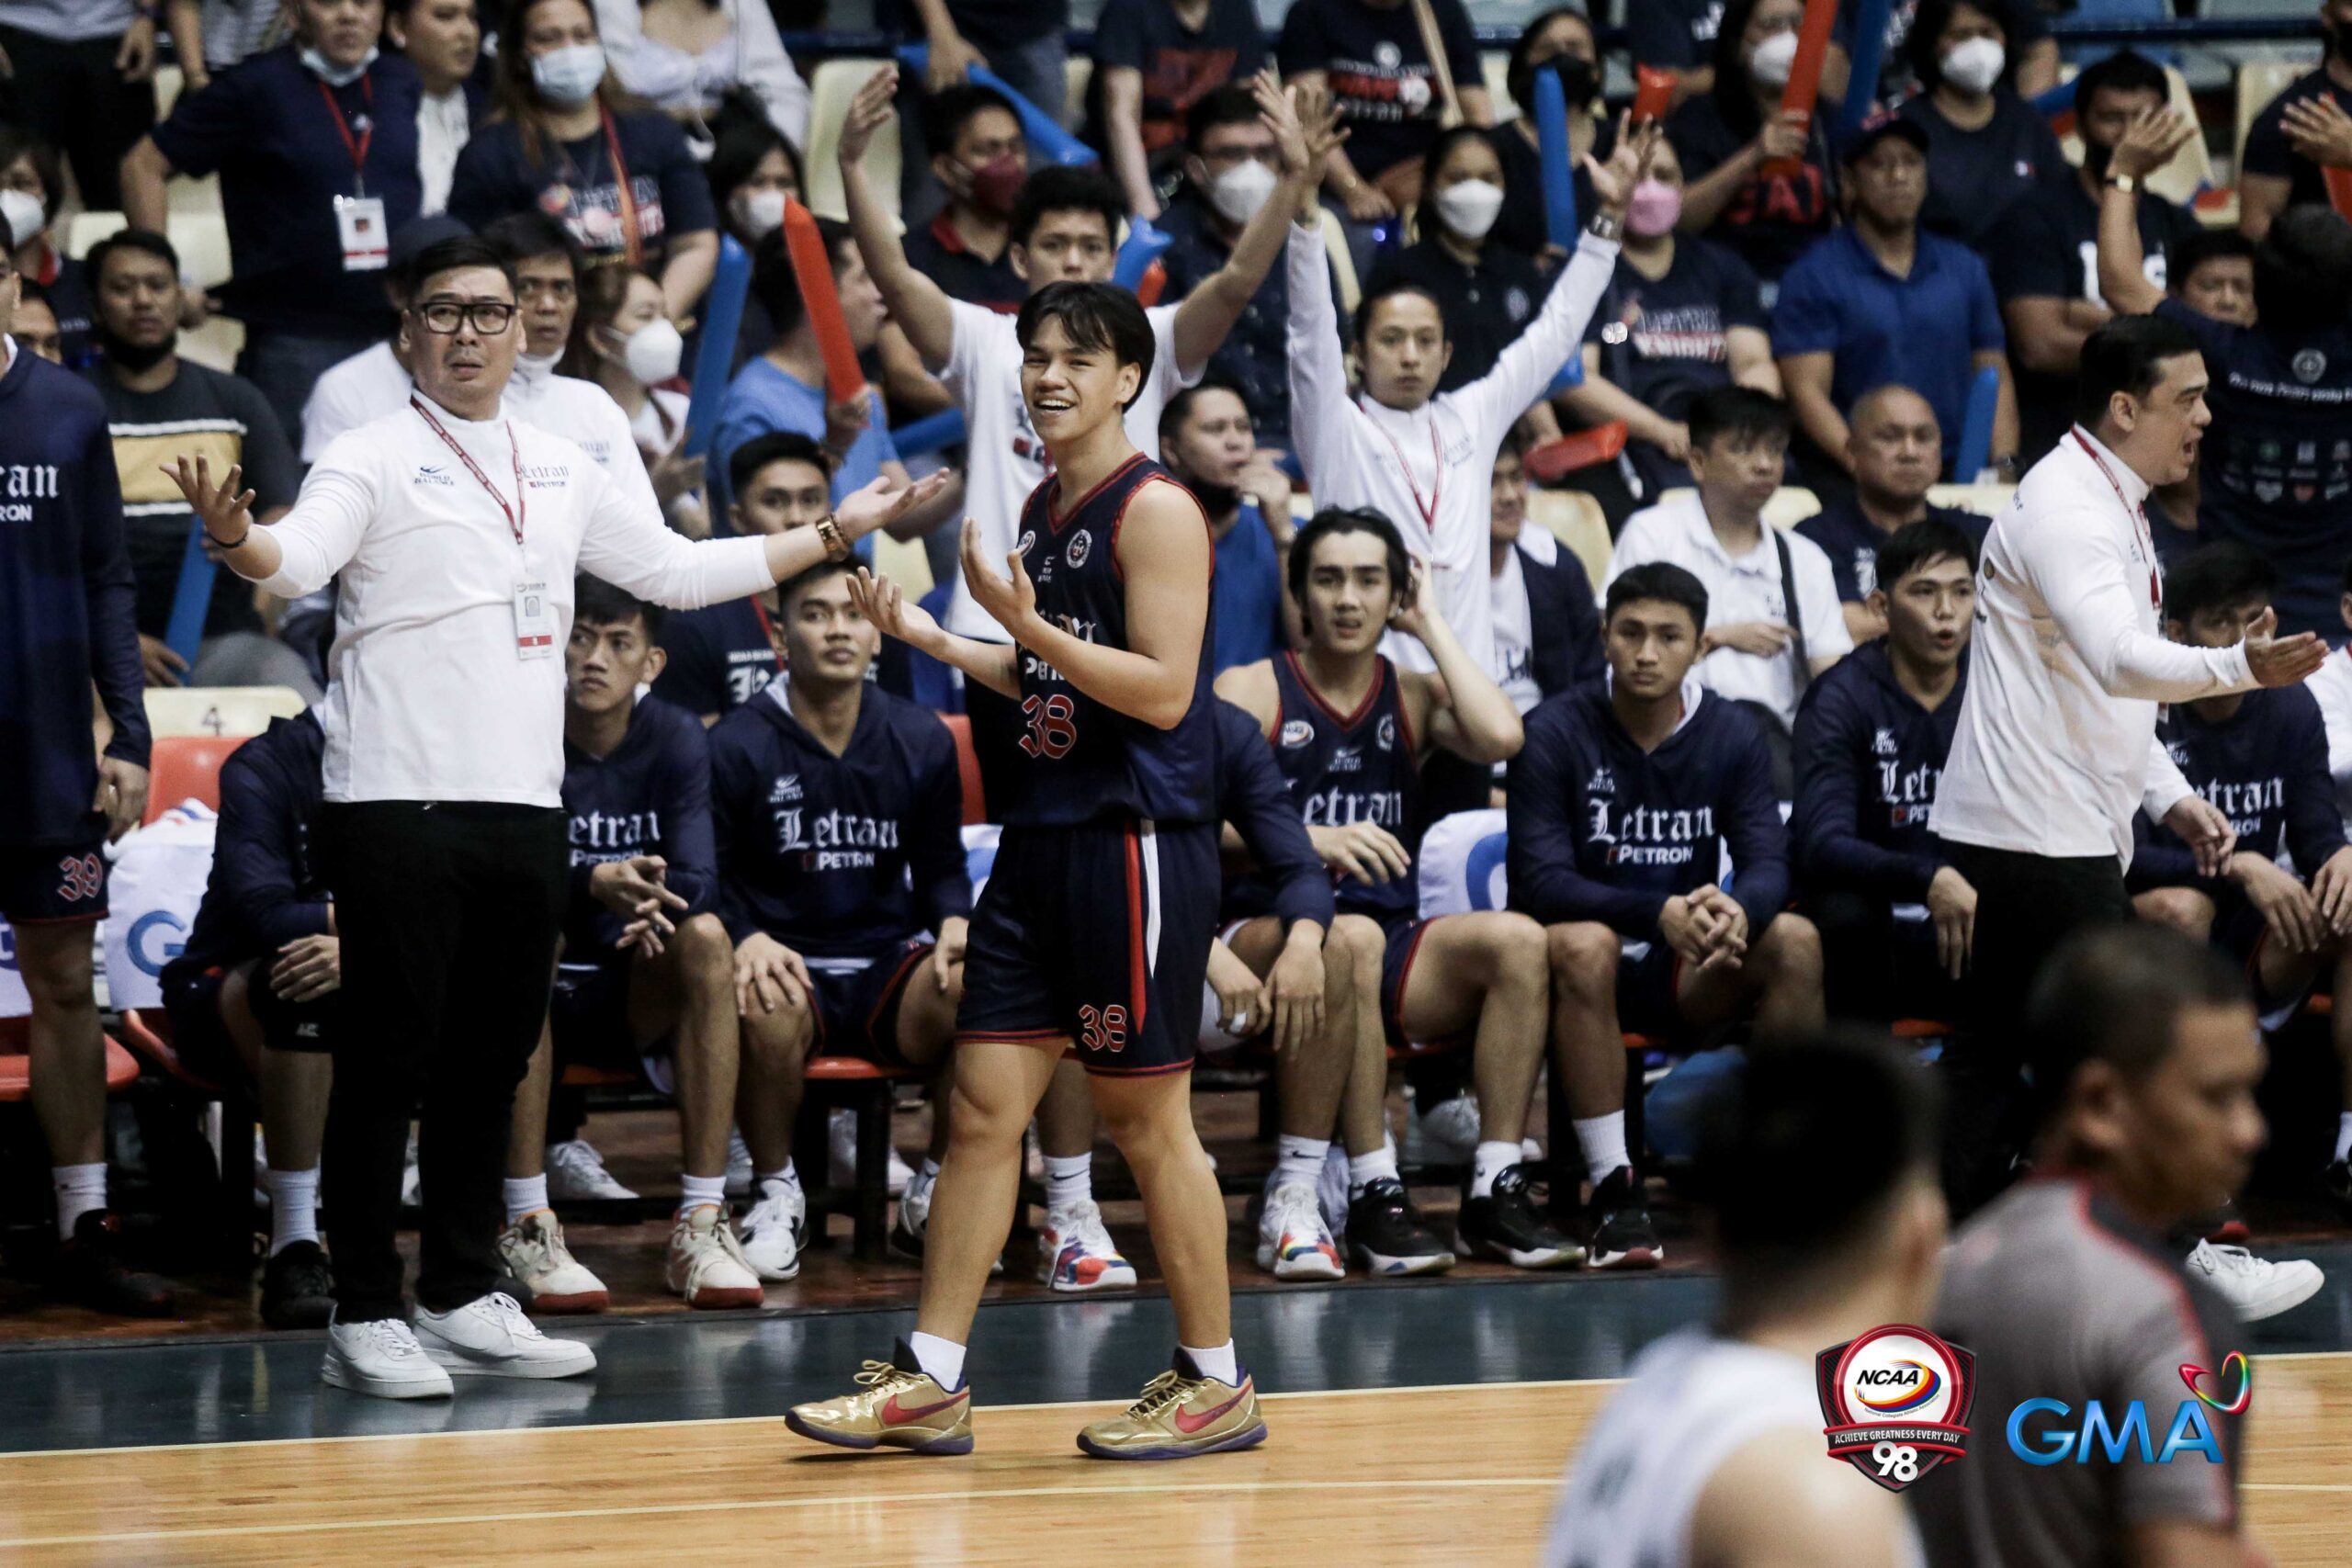 Fran Yu-less Letran routs CSB, takes do-or-die Game 3 to complete three-peat